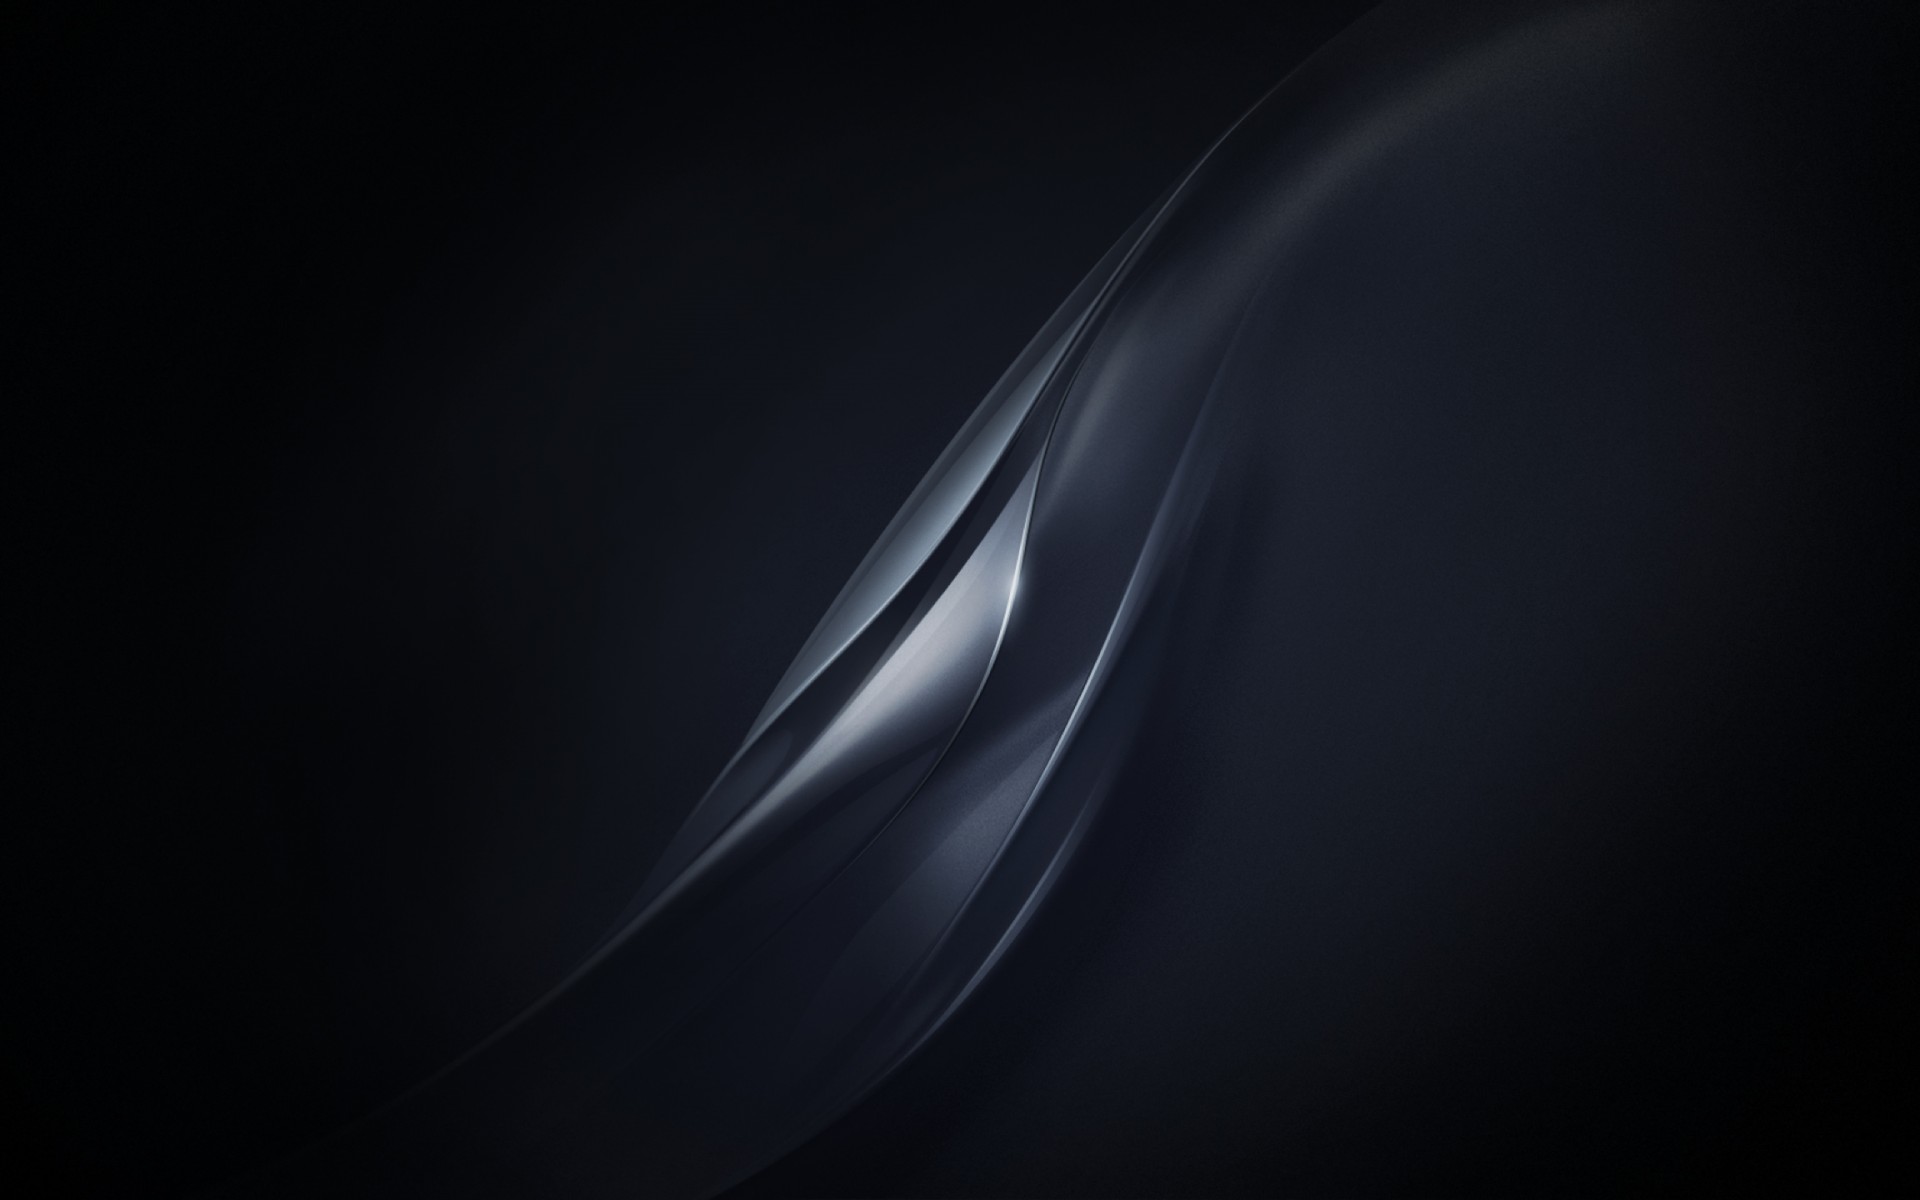 Black Waves, Darkness, Abstract Waves, Creative - Darkness - HD Wallpaper 